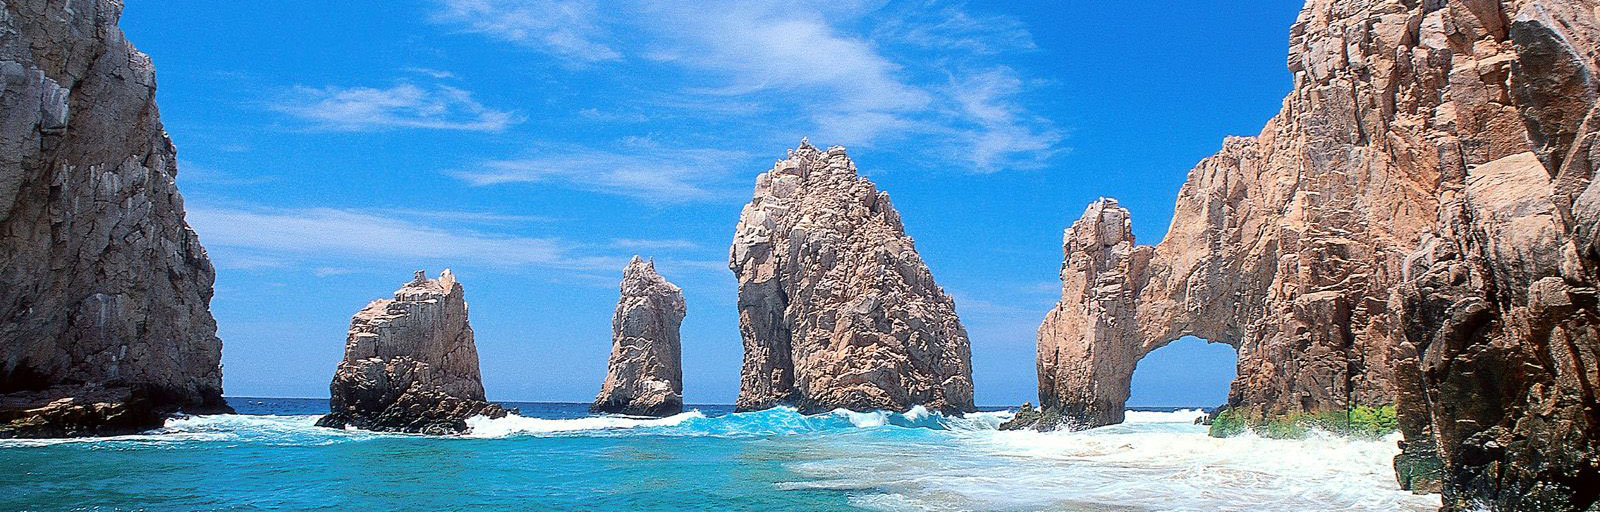 Cabo Yoga Retreats in Baja, Mexico: The Famous Cabo Arch